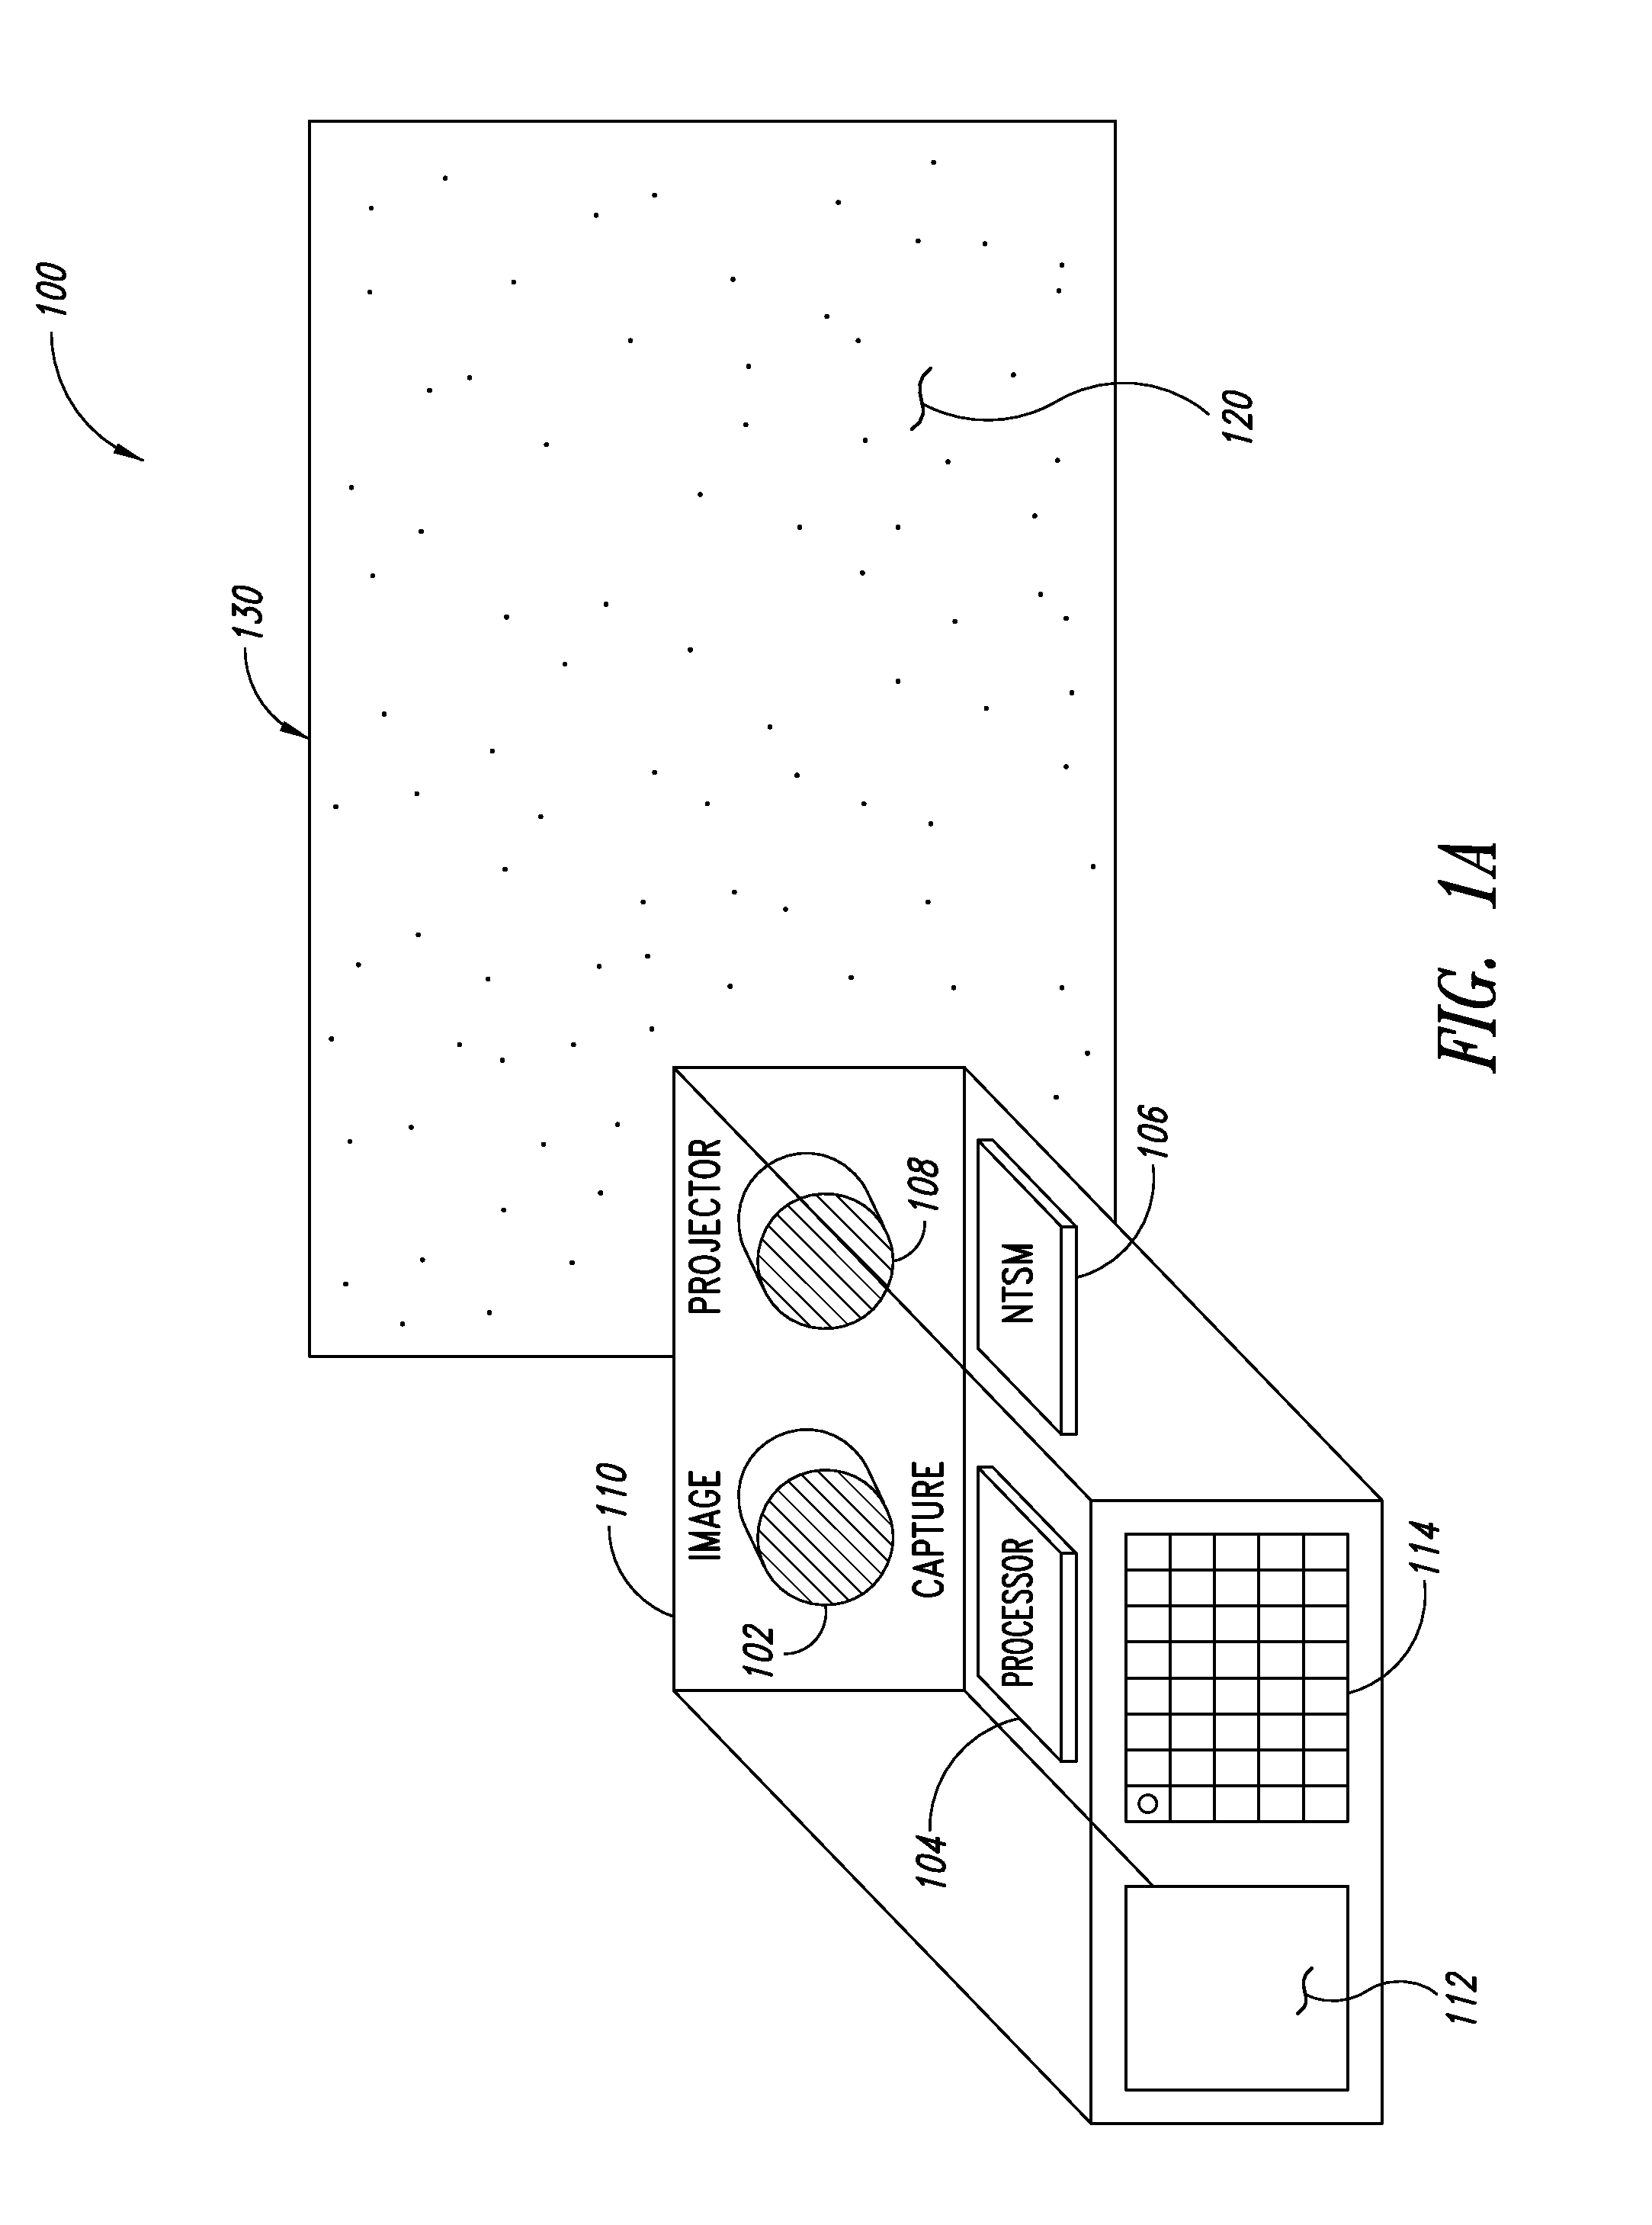 Systems and methods for enhancing dimensioning, for example volume dimensioning